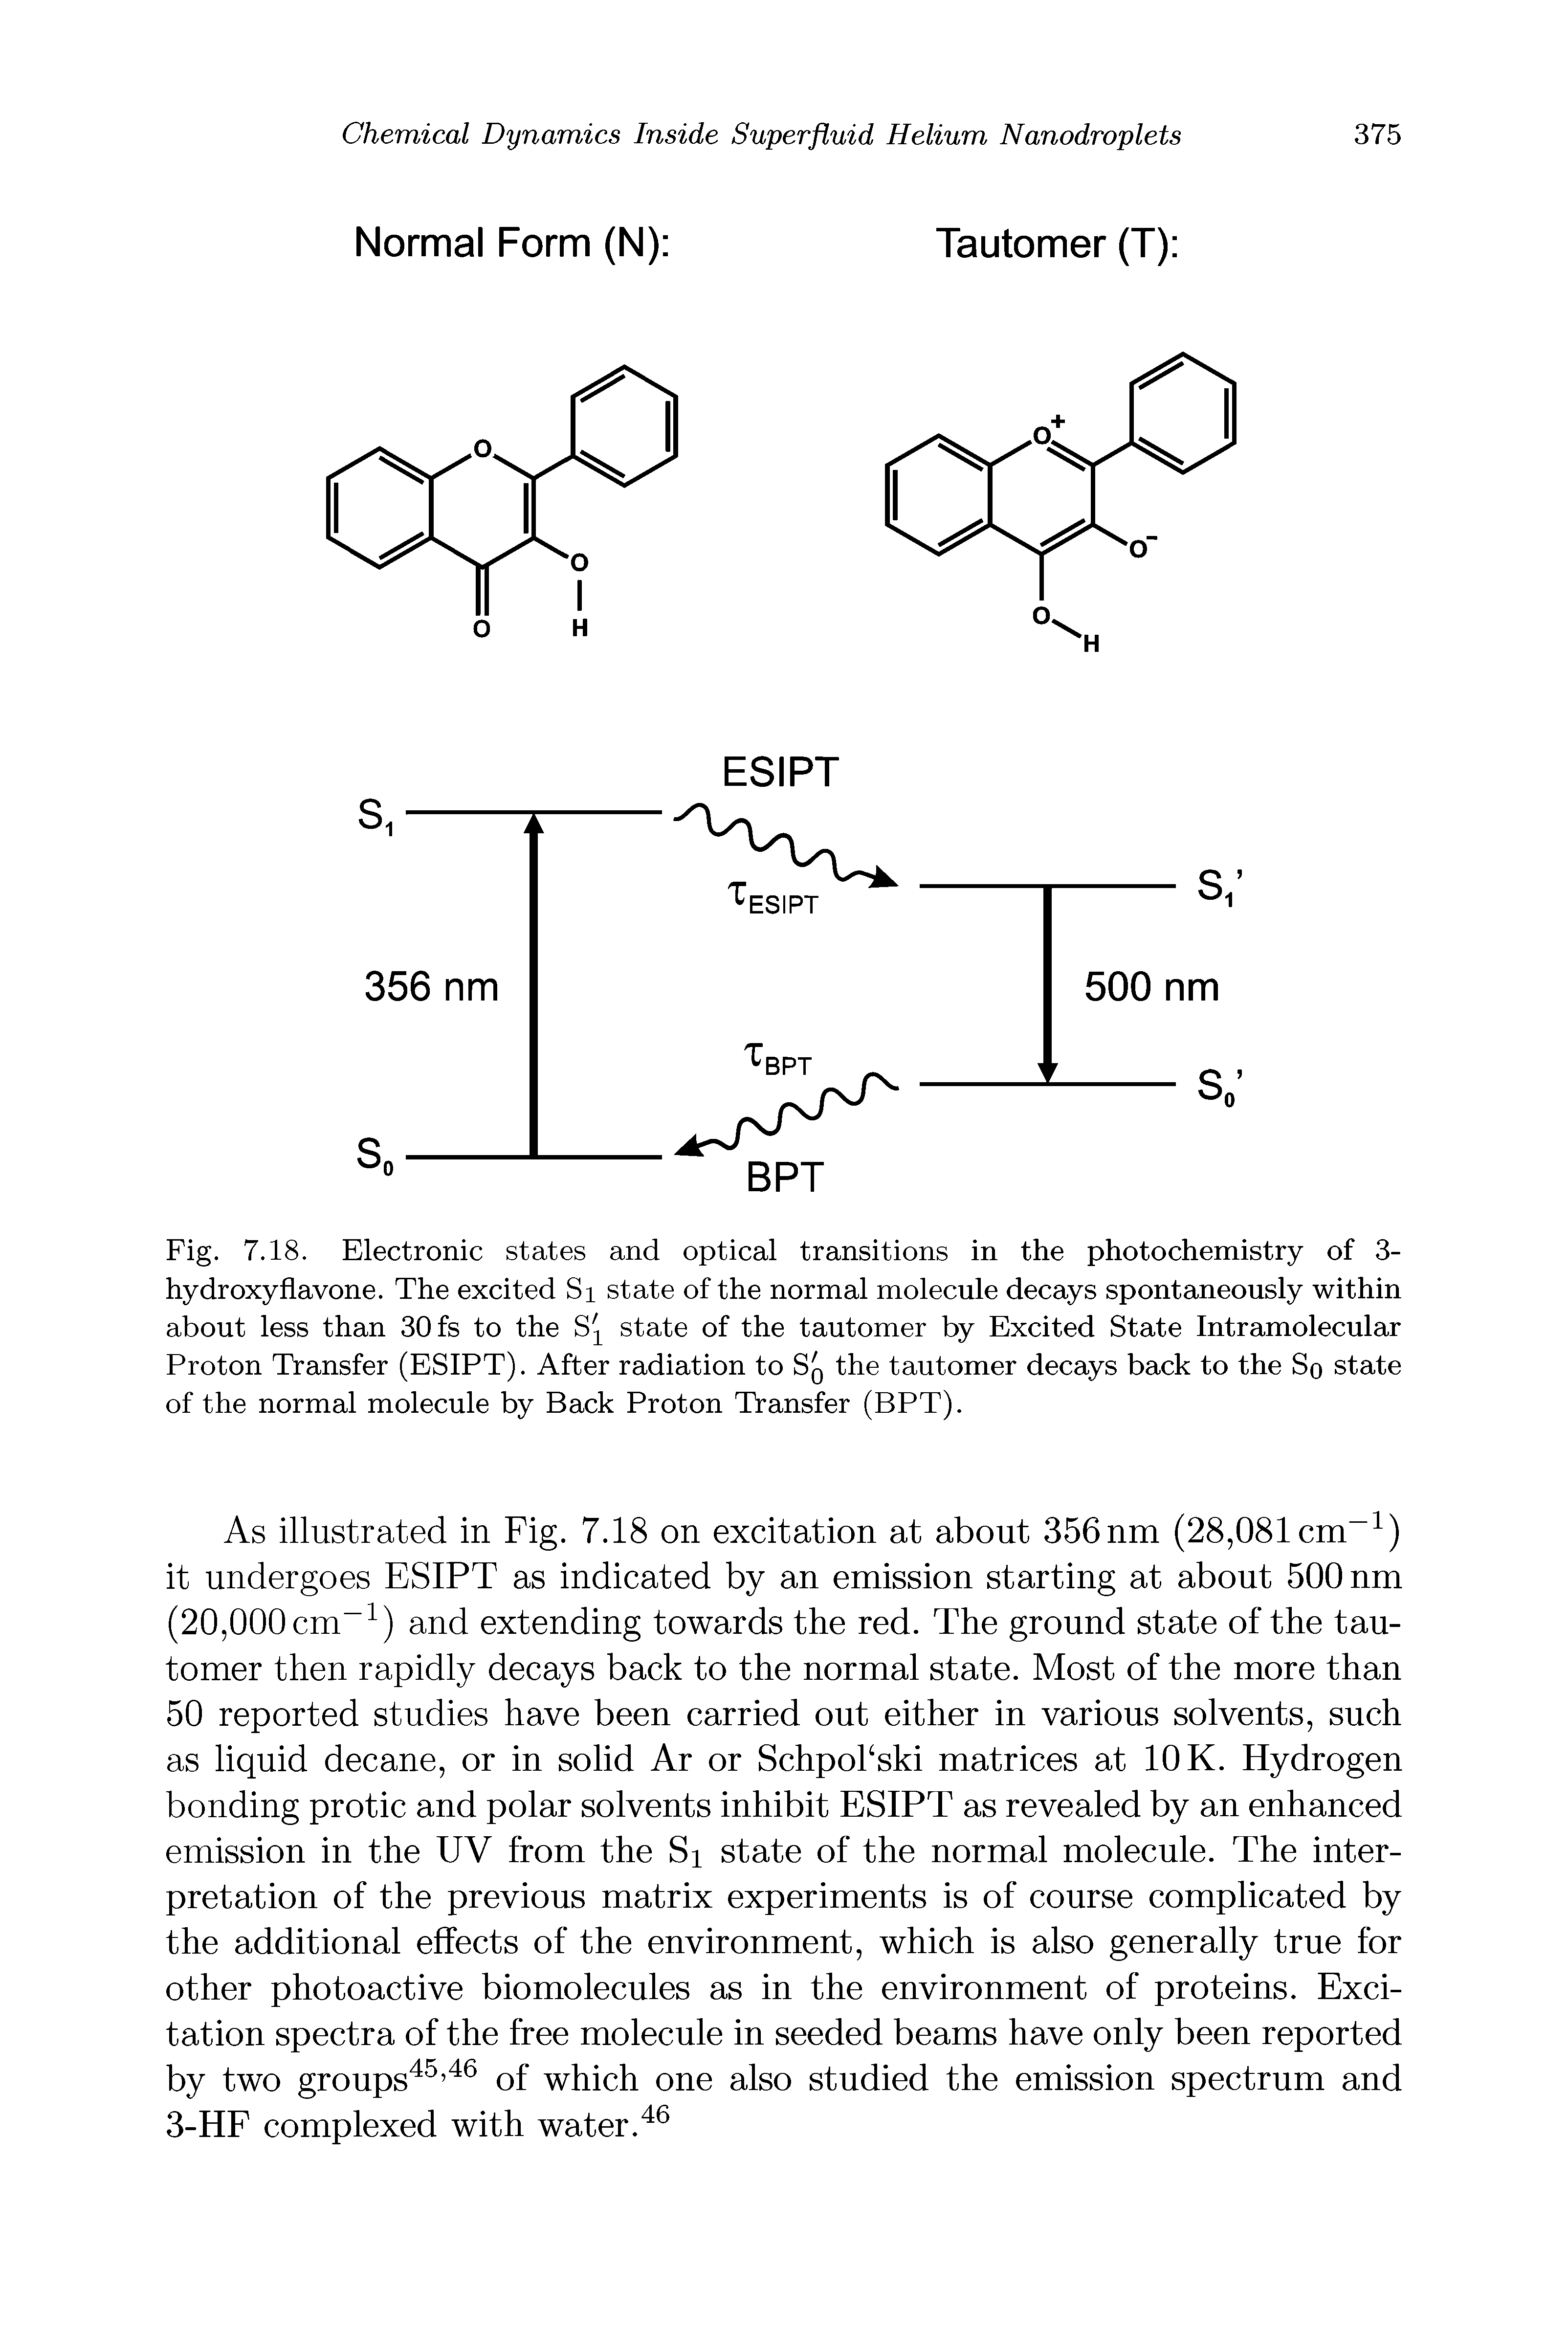 Fig. 7.18. Electronic states and optical transitions in the photochemistry of 3-hydroxyflavone. The excited Si state of the normal molecule decays spontaneously within about less than 30 fs to the state of the tautomer by Excited State Intramolecular Proton Transfer (ESIPT). After radiation to Sq the tautomer decays back to the So state of the normal molecule by Back Proton Transfer (BPT).